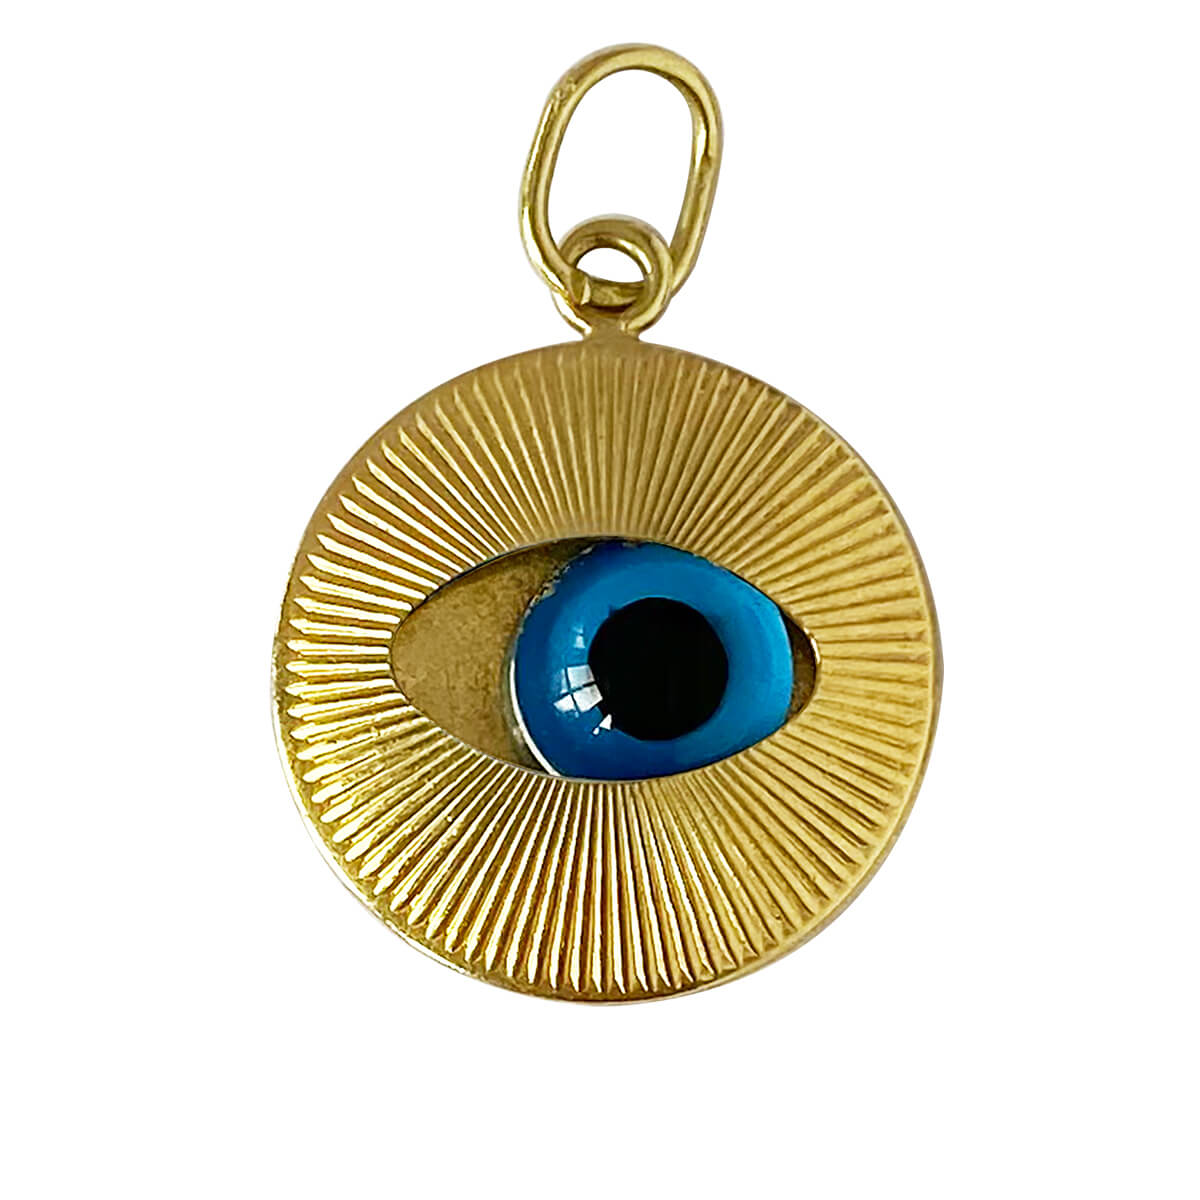 9 carat yellow gold all seeing eye with moving blue glass pupil